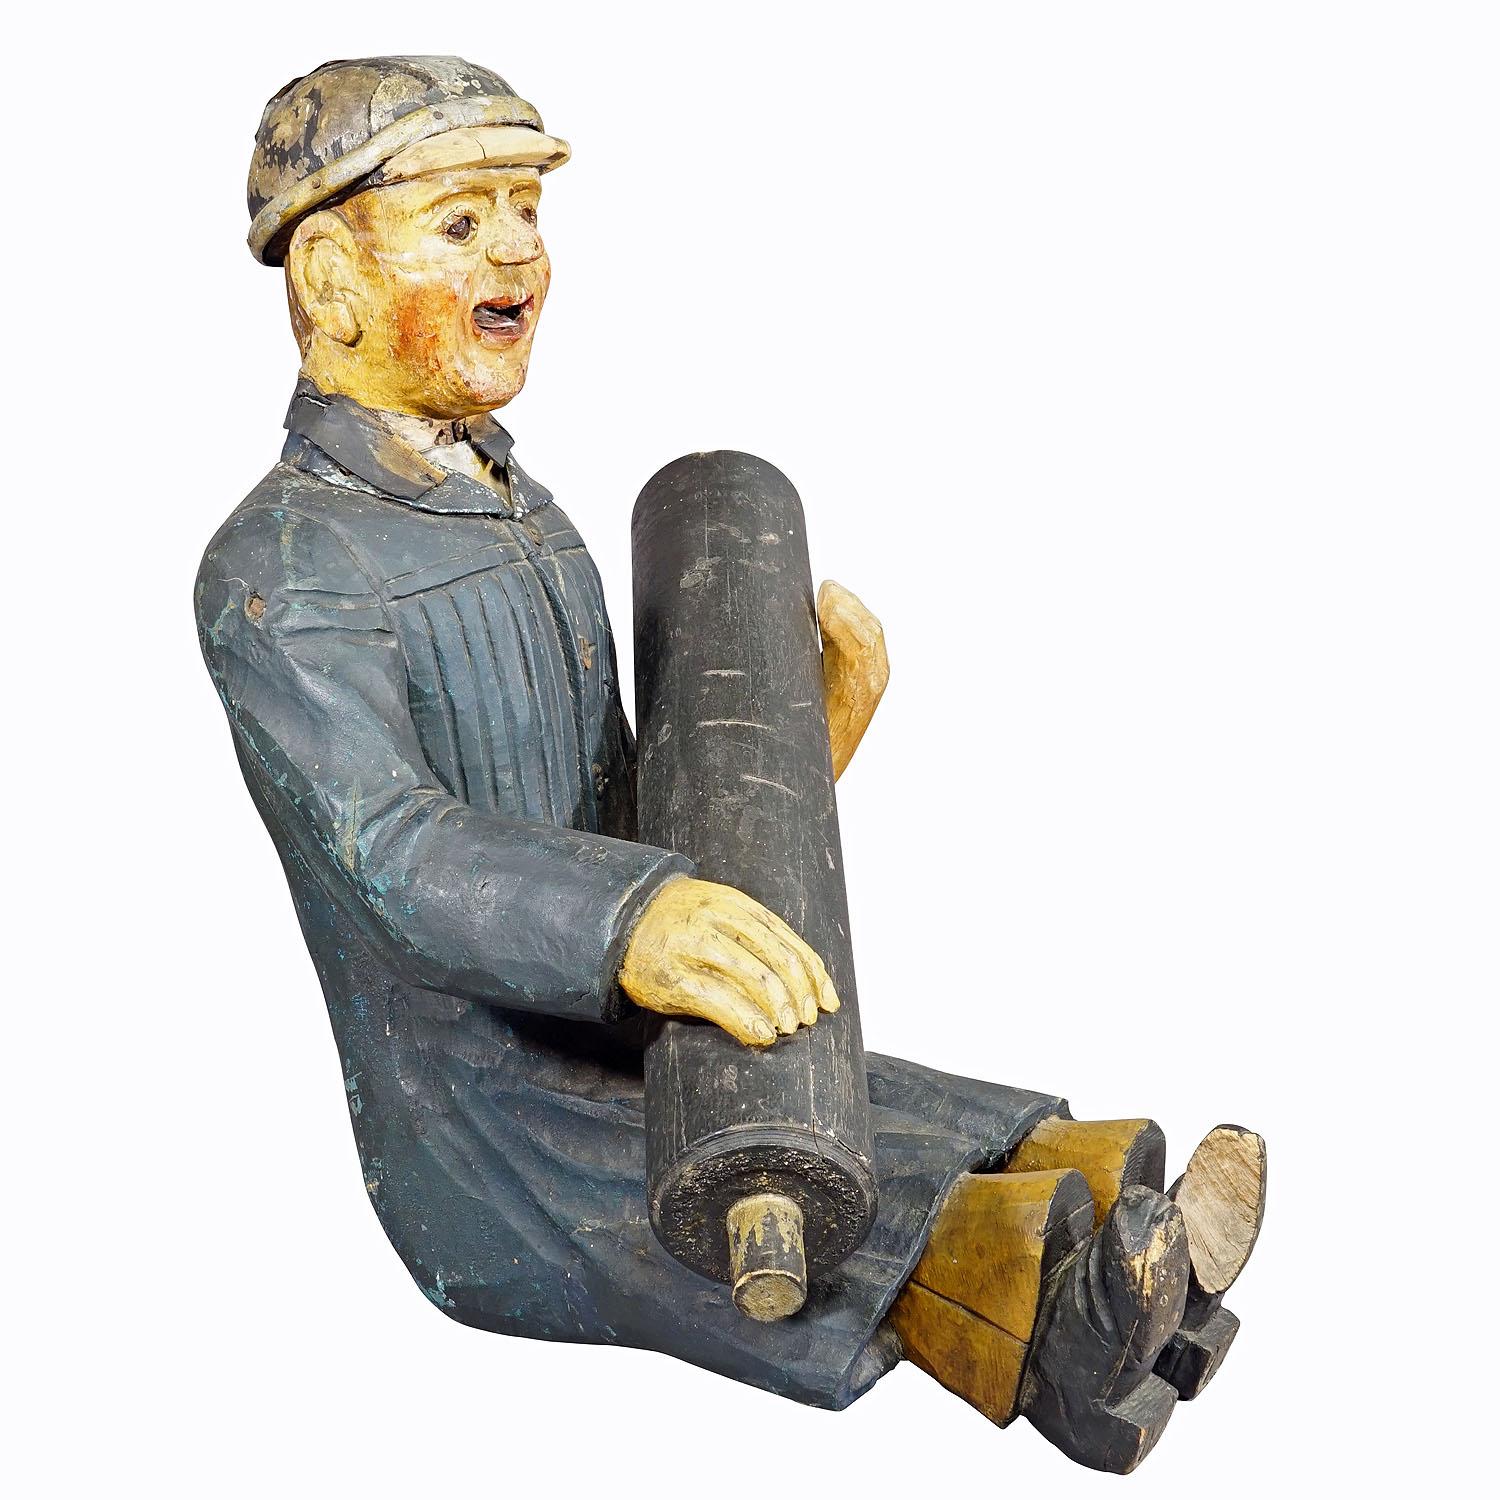 Antique Fireman from a Children's Carousel, Germany 1920s

An antique wooden sculpture of a fireman. Formerly used as decoration for the fire engine of a Bavarian children's carousel. The head has a mechanism for turning the head. As the carousel